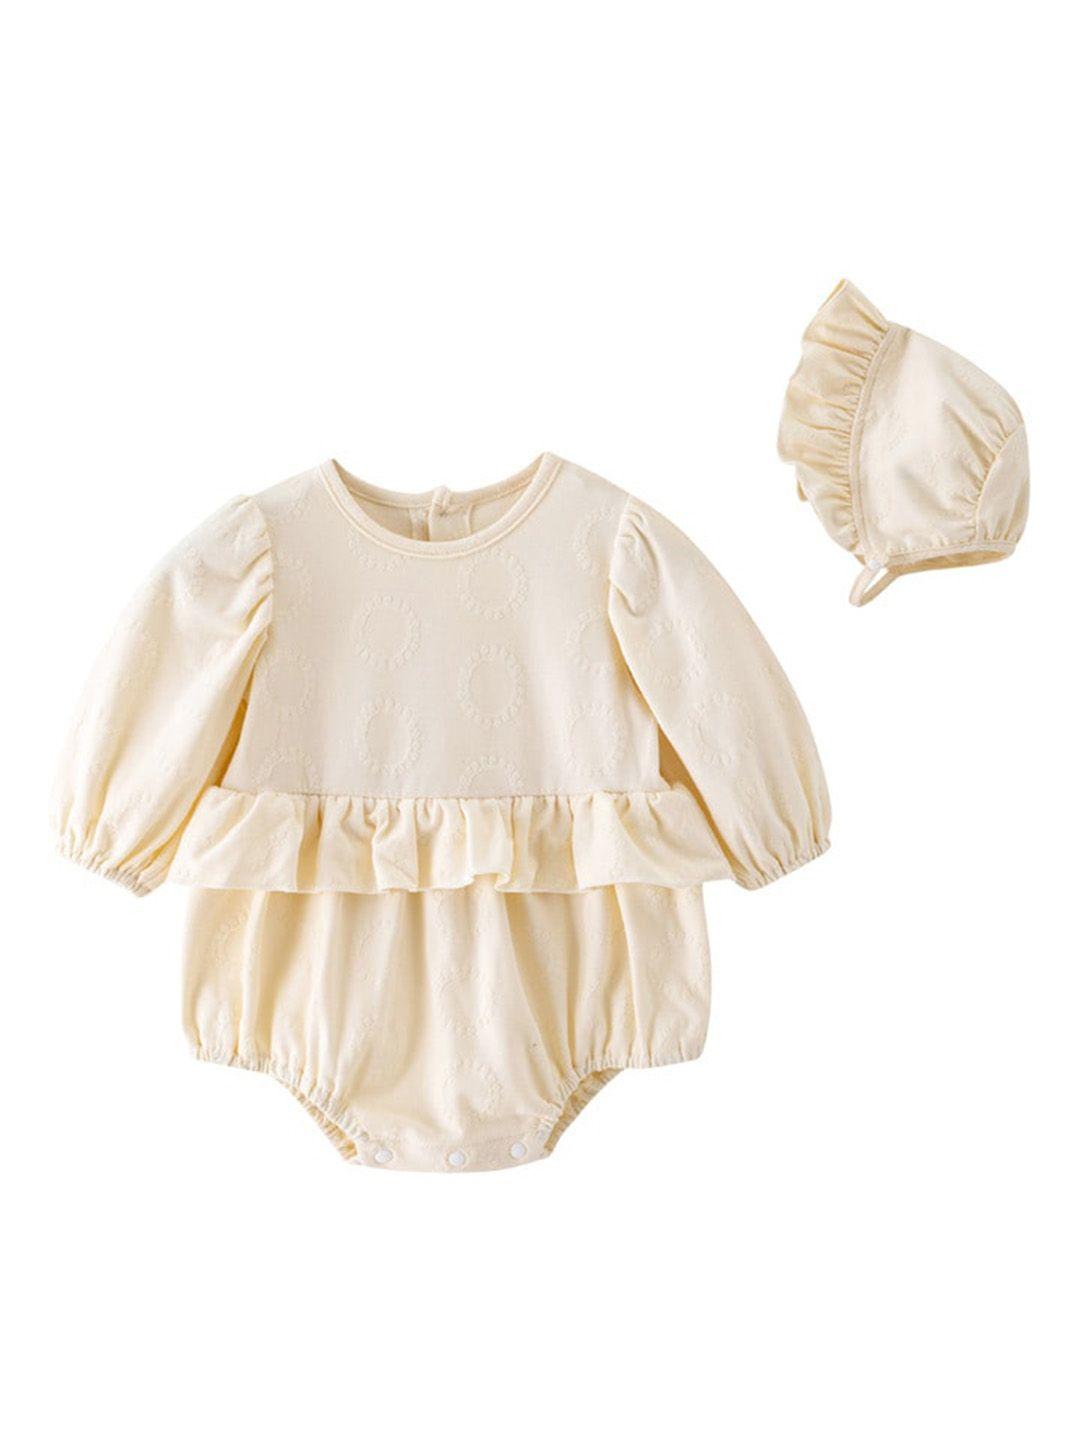 stylecast-infant-girls-beige-self-design-cotton-rompers-with-cap